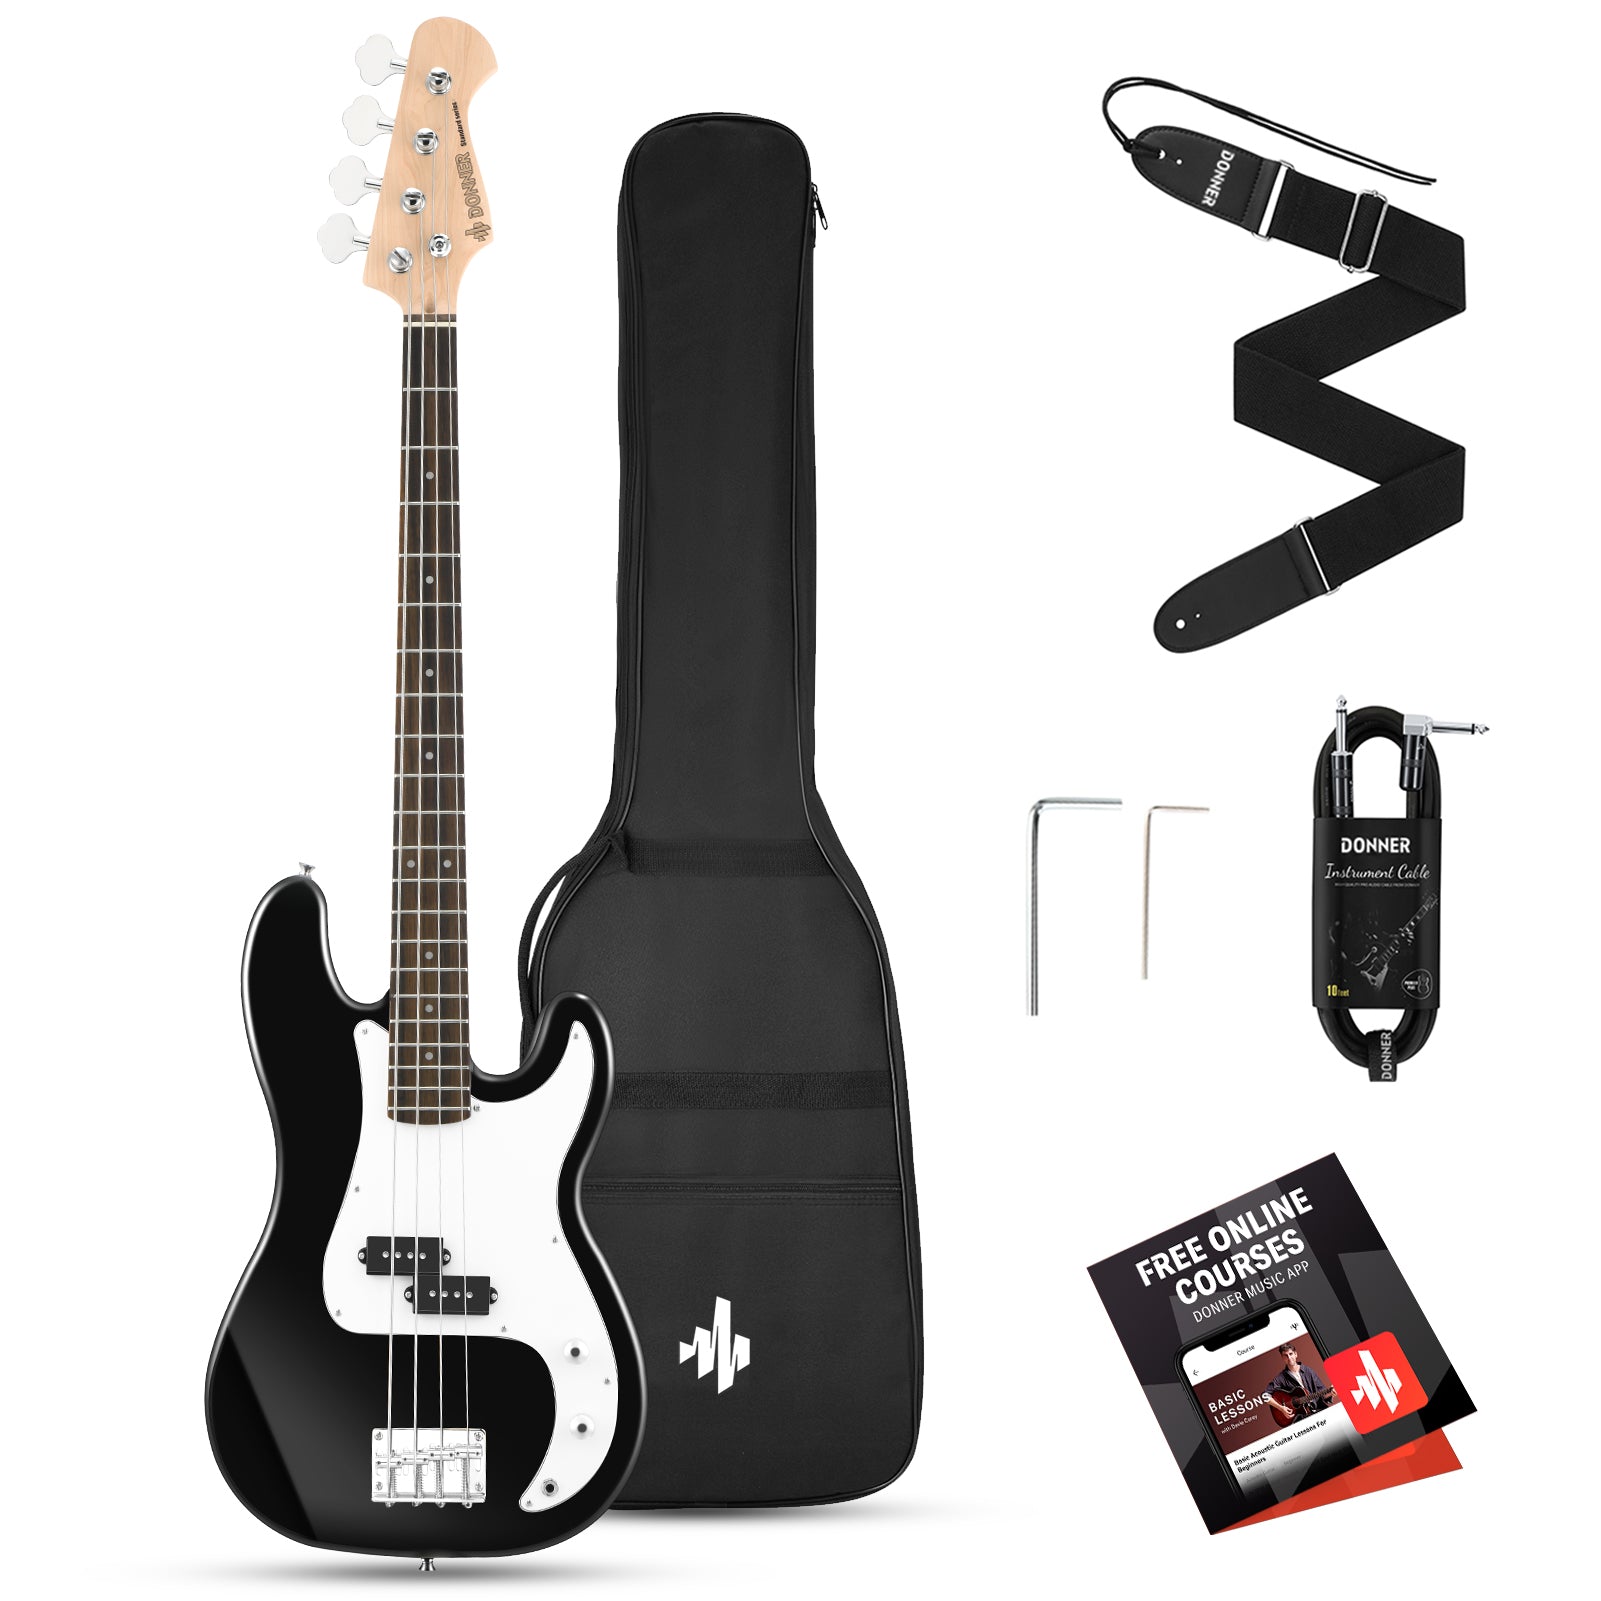 

Donner DPB-510 Electric Bass Guitar Kit 4 Strings Full-Size PB-Style Beginner Set with Gig Bag/Strap/Cable/Free Lesson